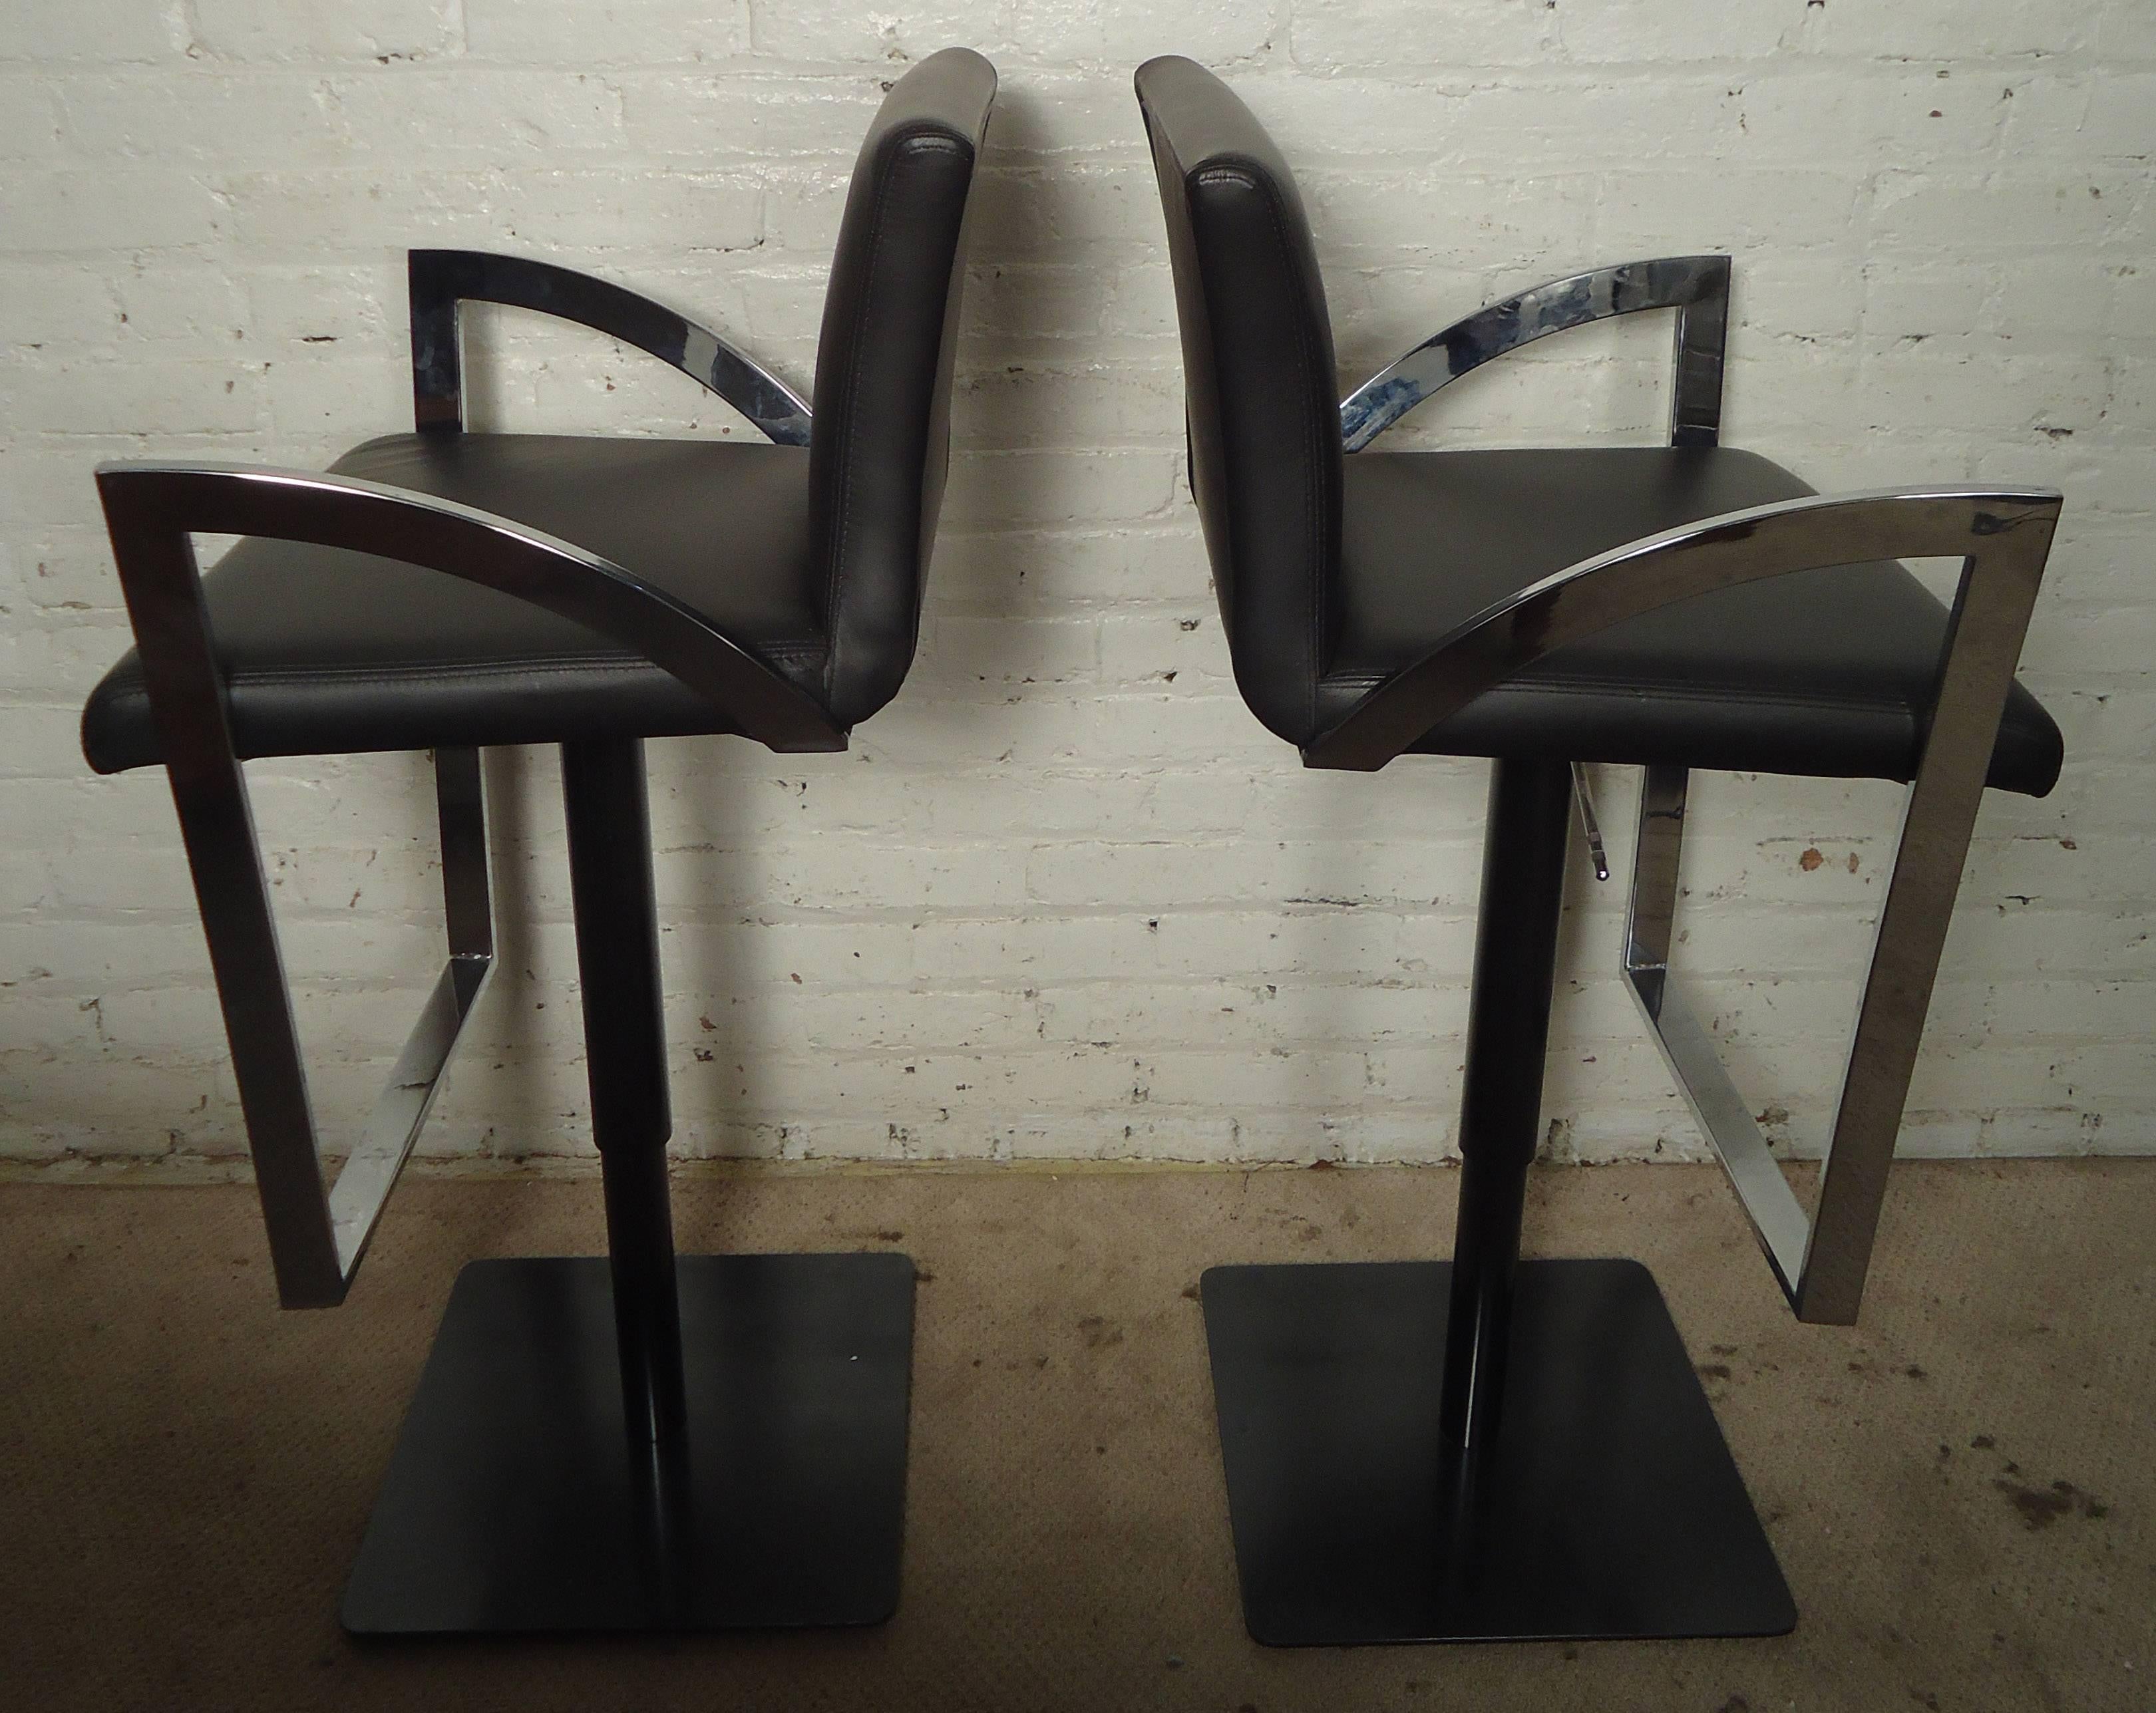 20th Century Pair of Mid-Century Modern Style Chrome and Leather Stools